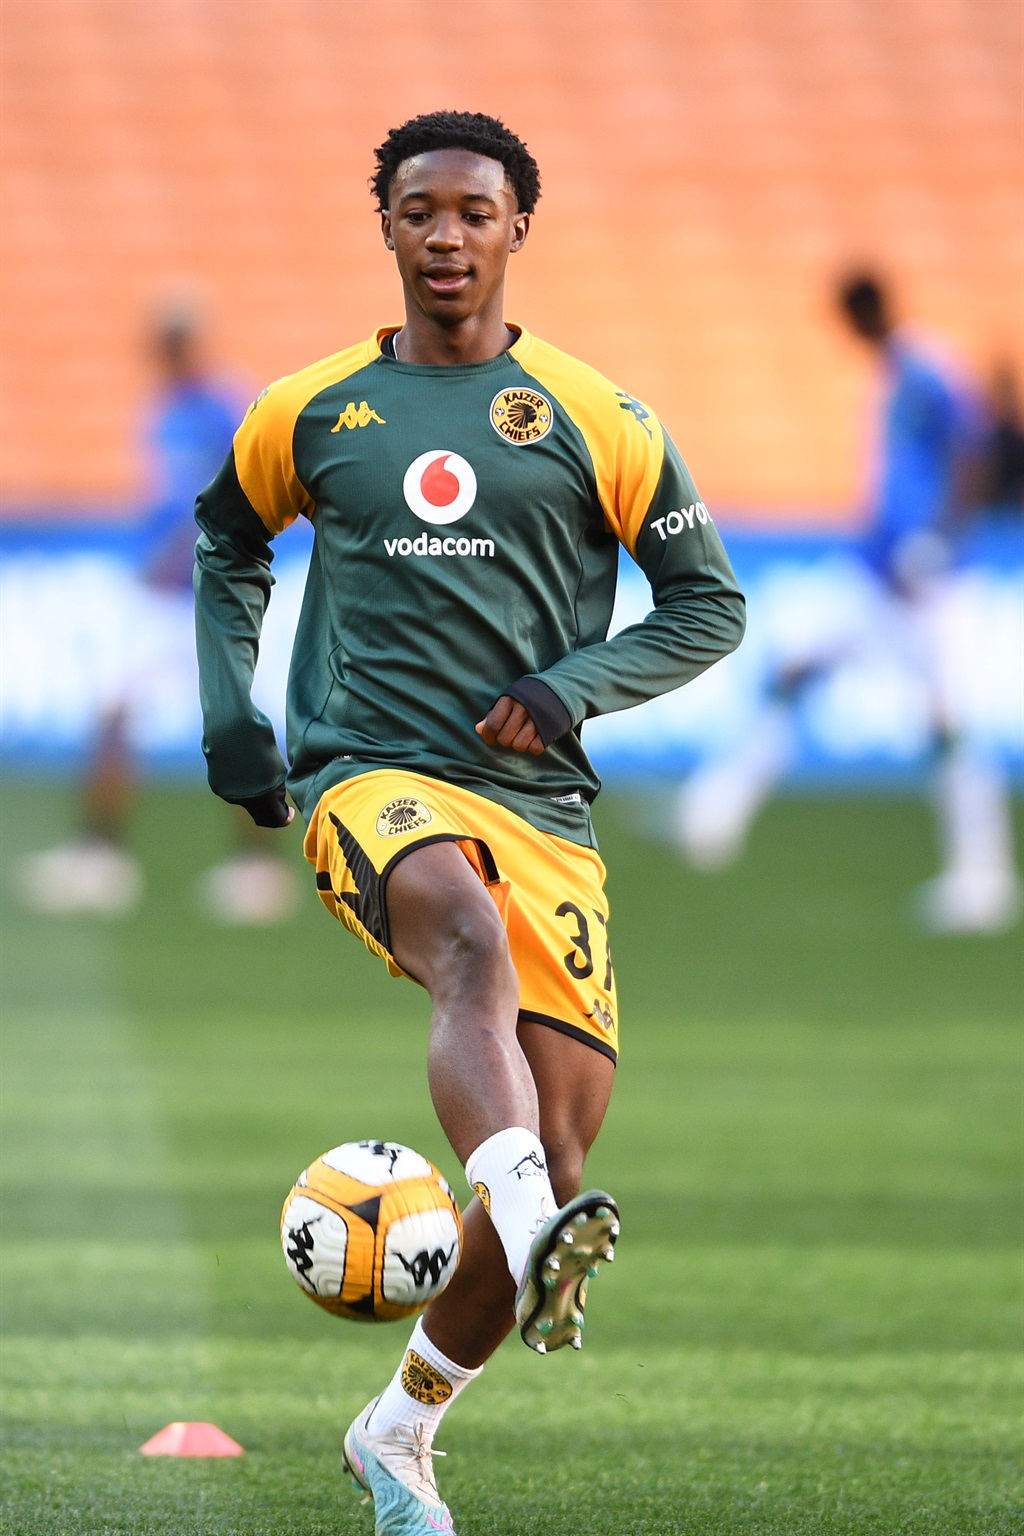 JOHANNESBURG, SOUTH AFRICA - AUGUST 26: Samkelo Zwane of Kaizer Chiefs during the DStv Premiership match between Kaizer Chiefs and AmaZulu FC at FNB Stadium on August 26, 2023 in Johannesburg, South Africa. (Photo by Lefty Shivambu/Gallo Images)